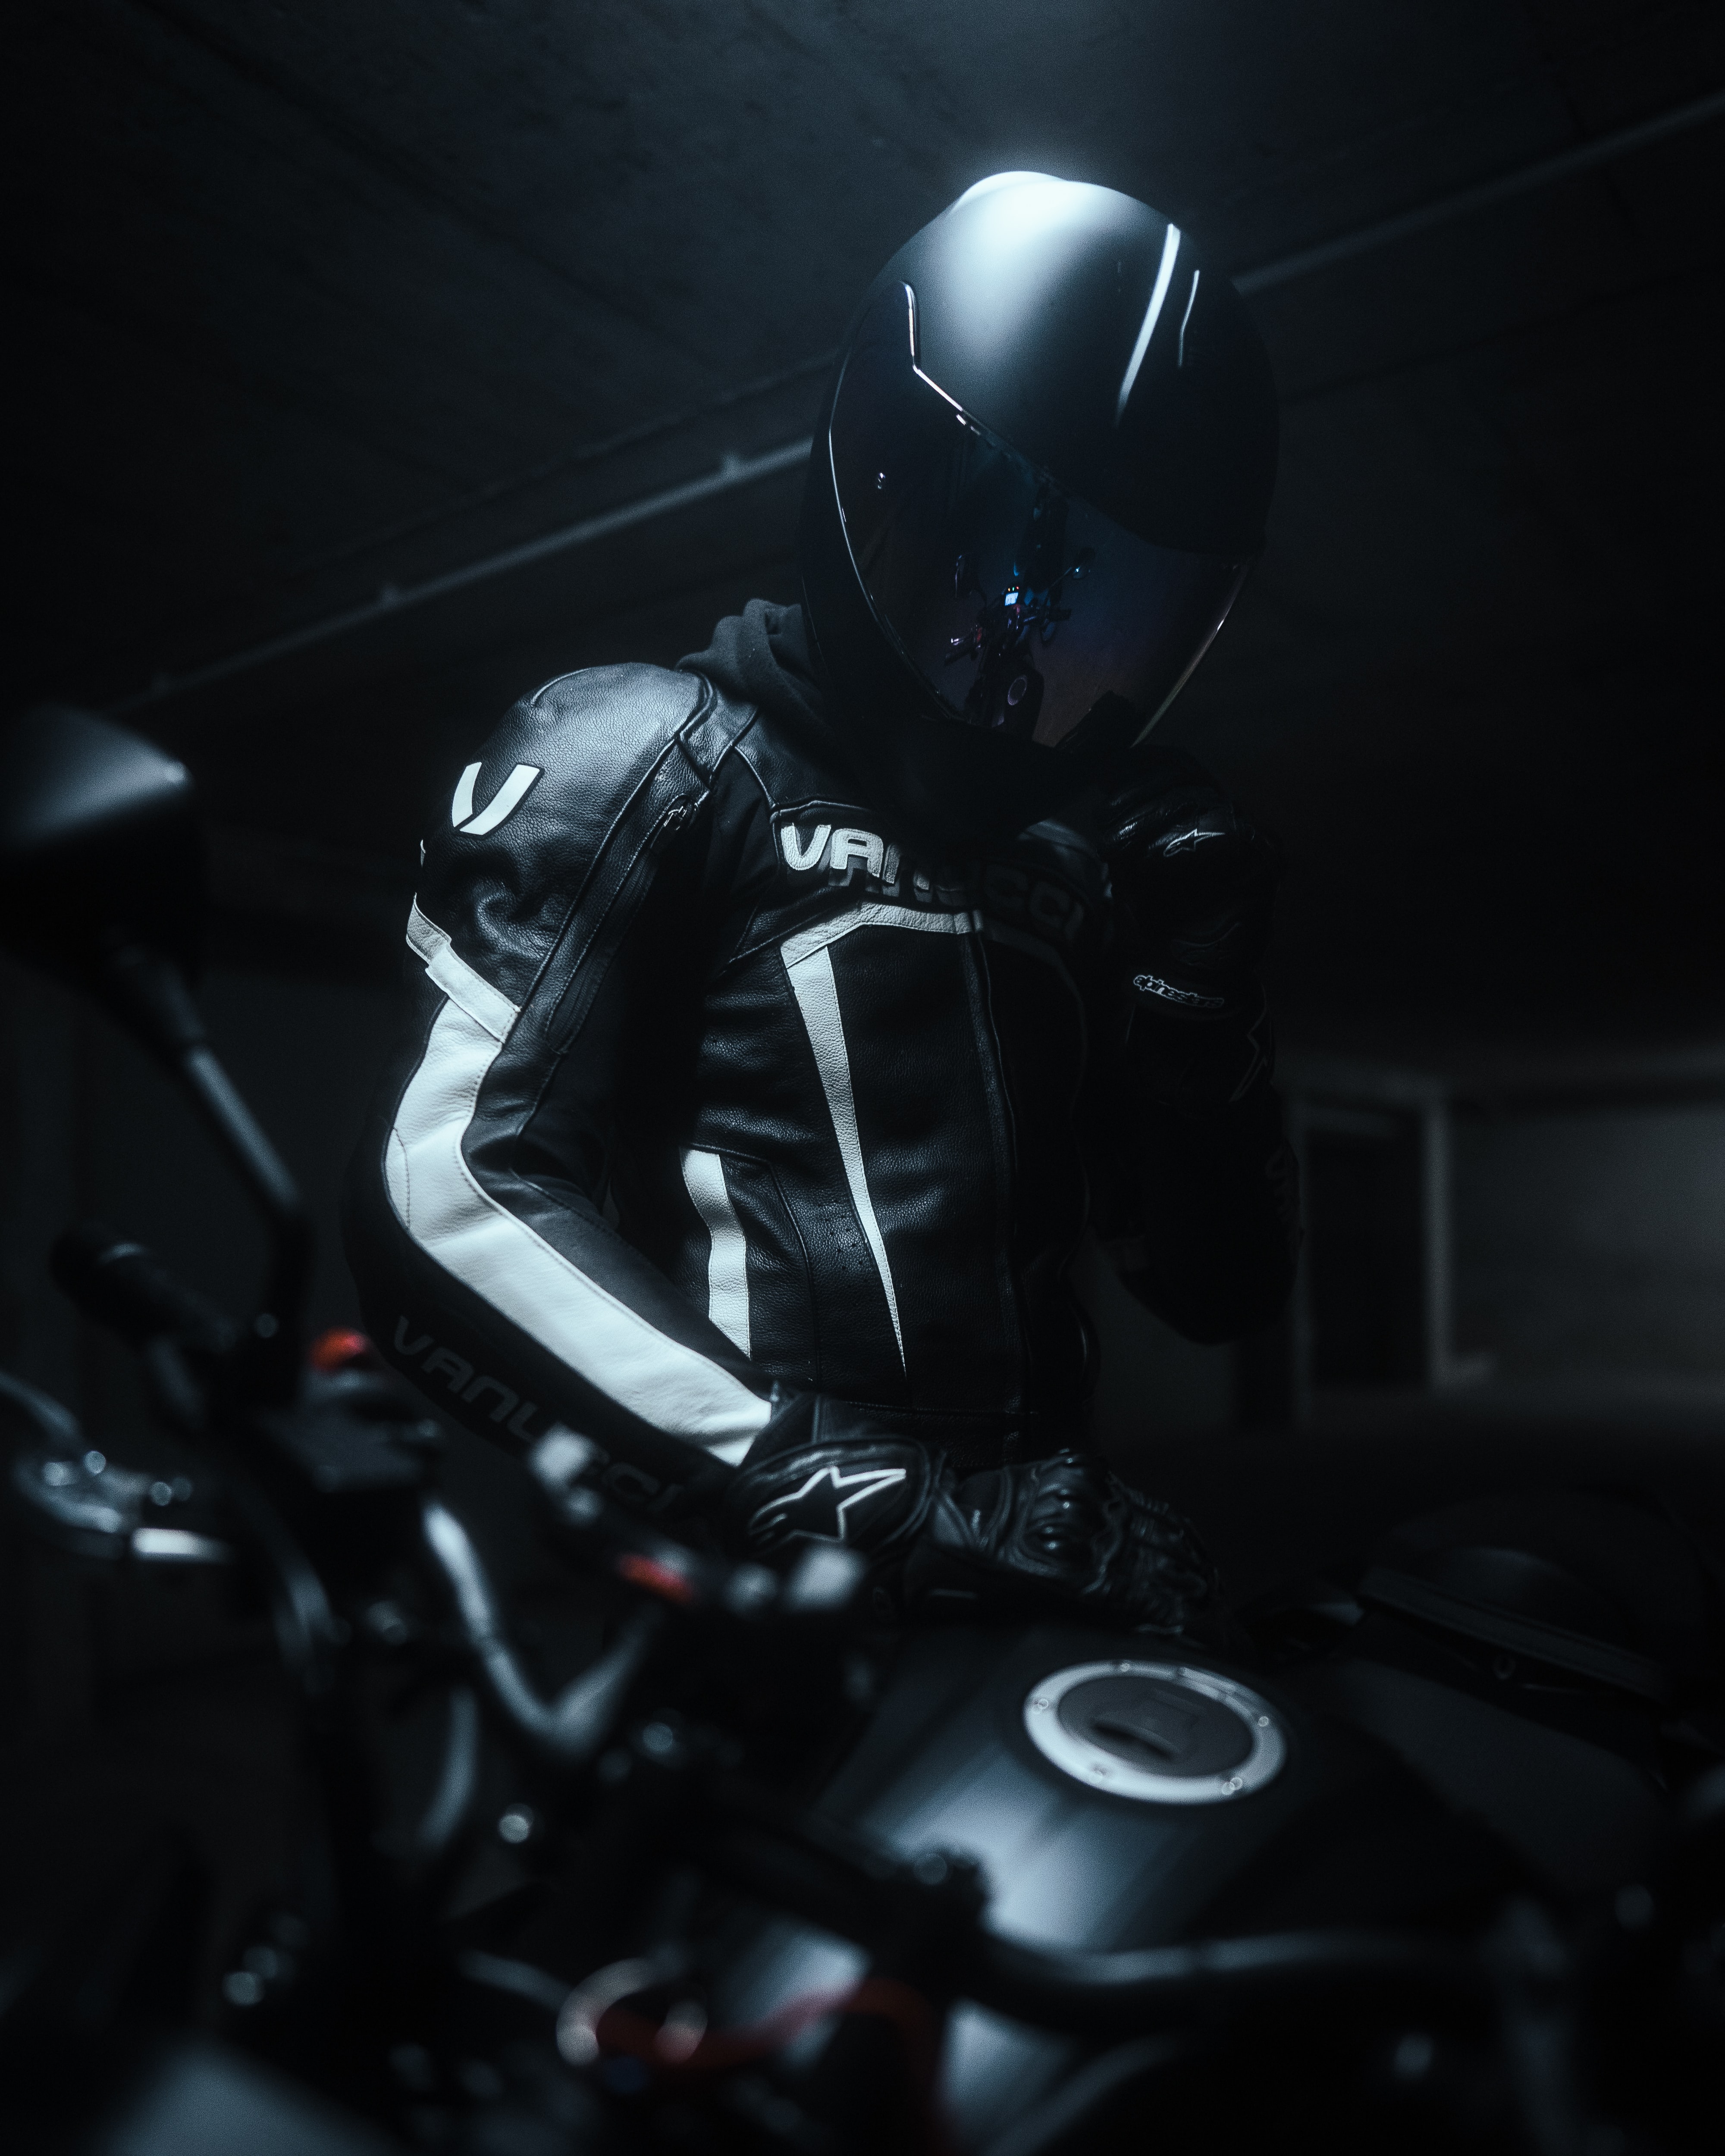 134415 Screensavers and Wallpapers Motorcyclist for phone. Download motorcycles, black, motorcyclist, helmet, motorcycle, biker pictures for free